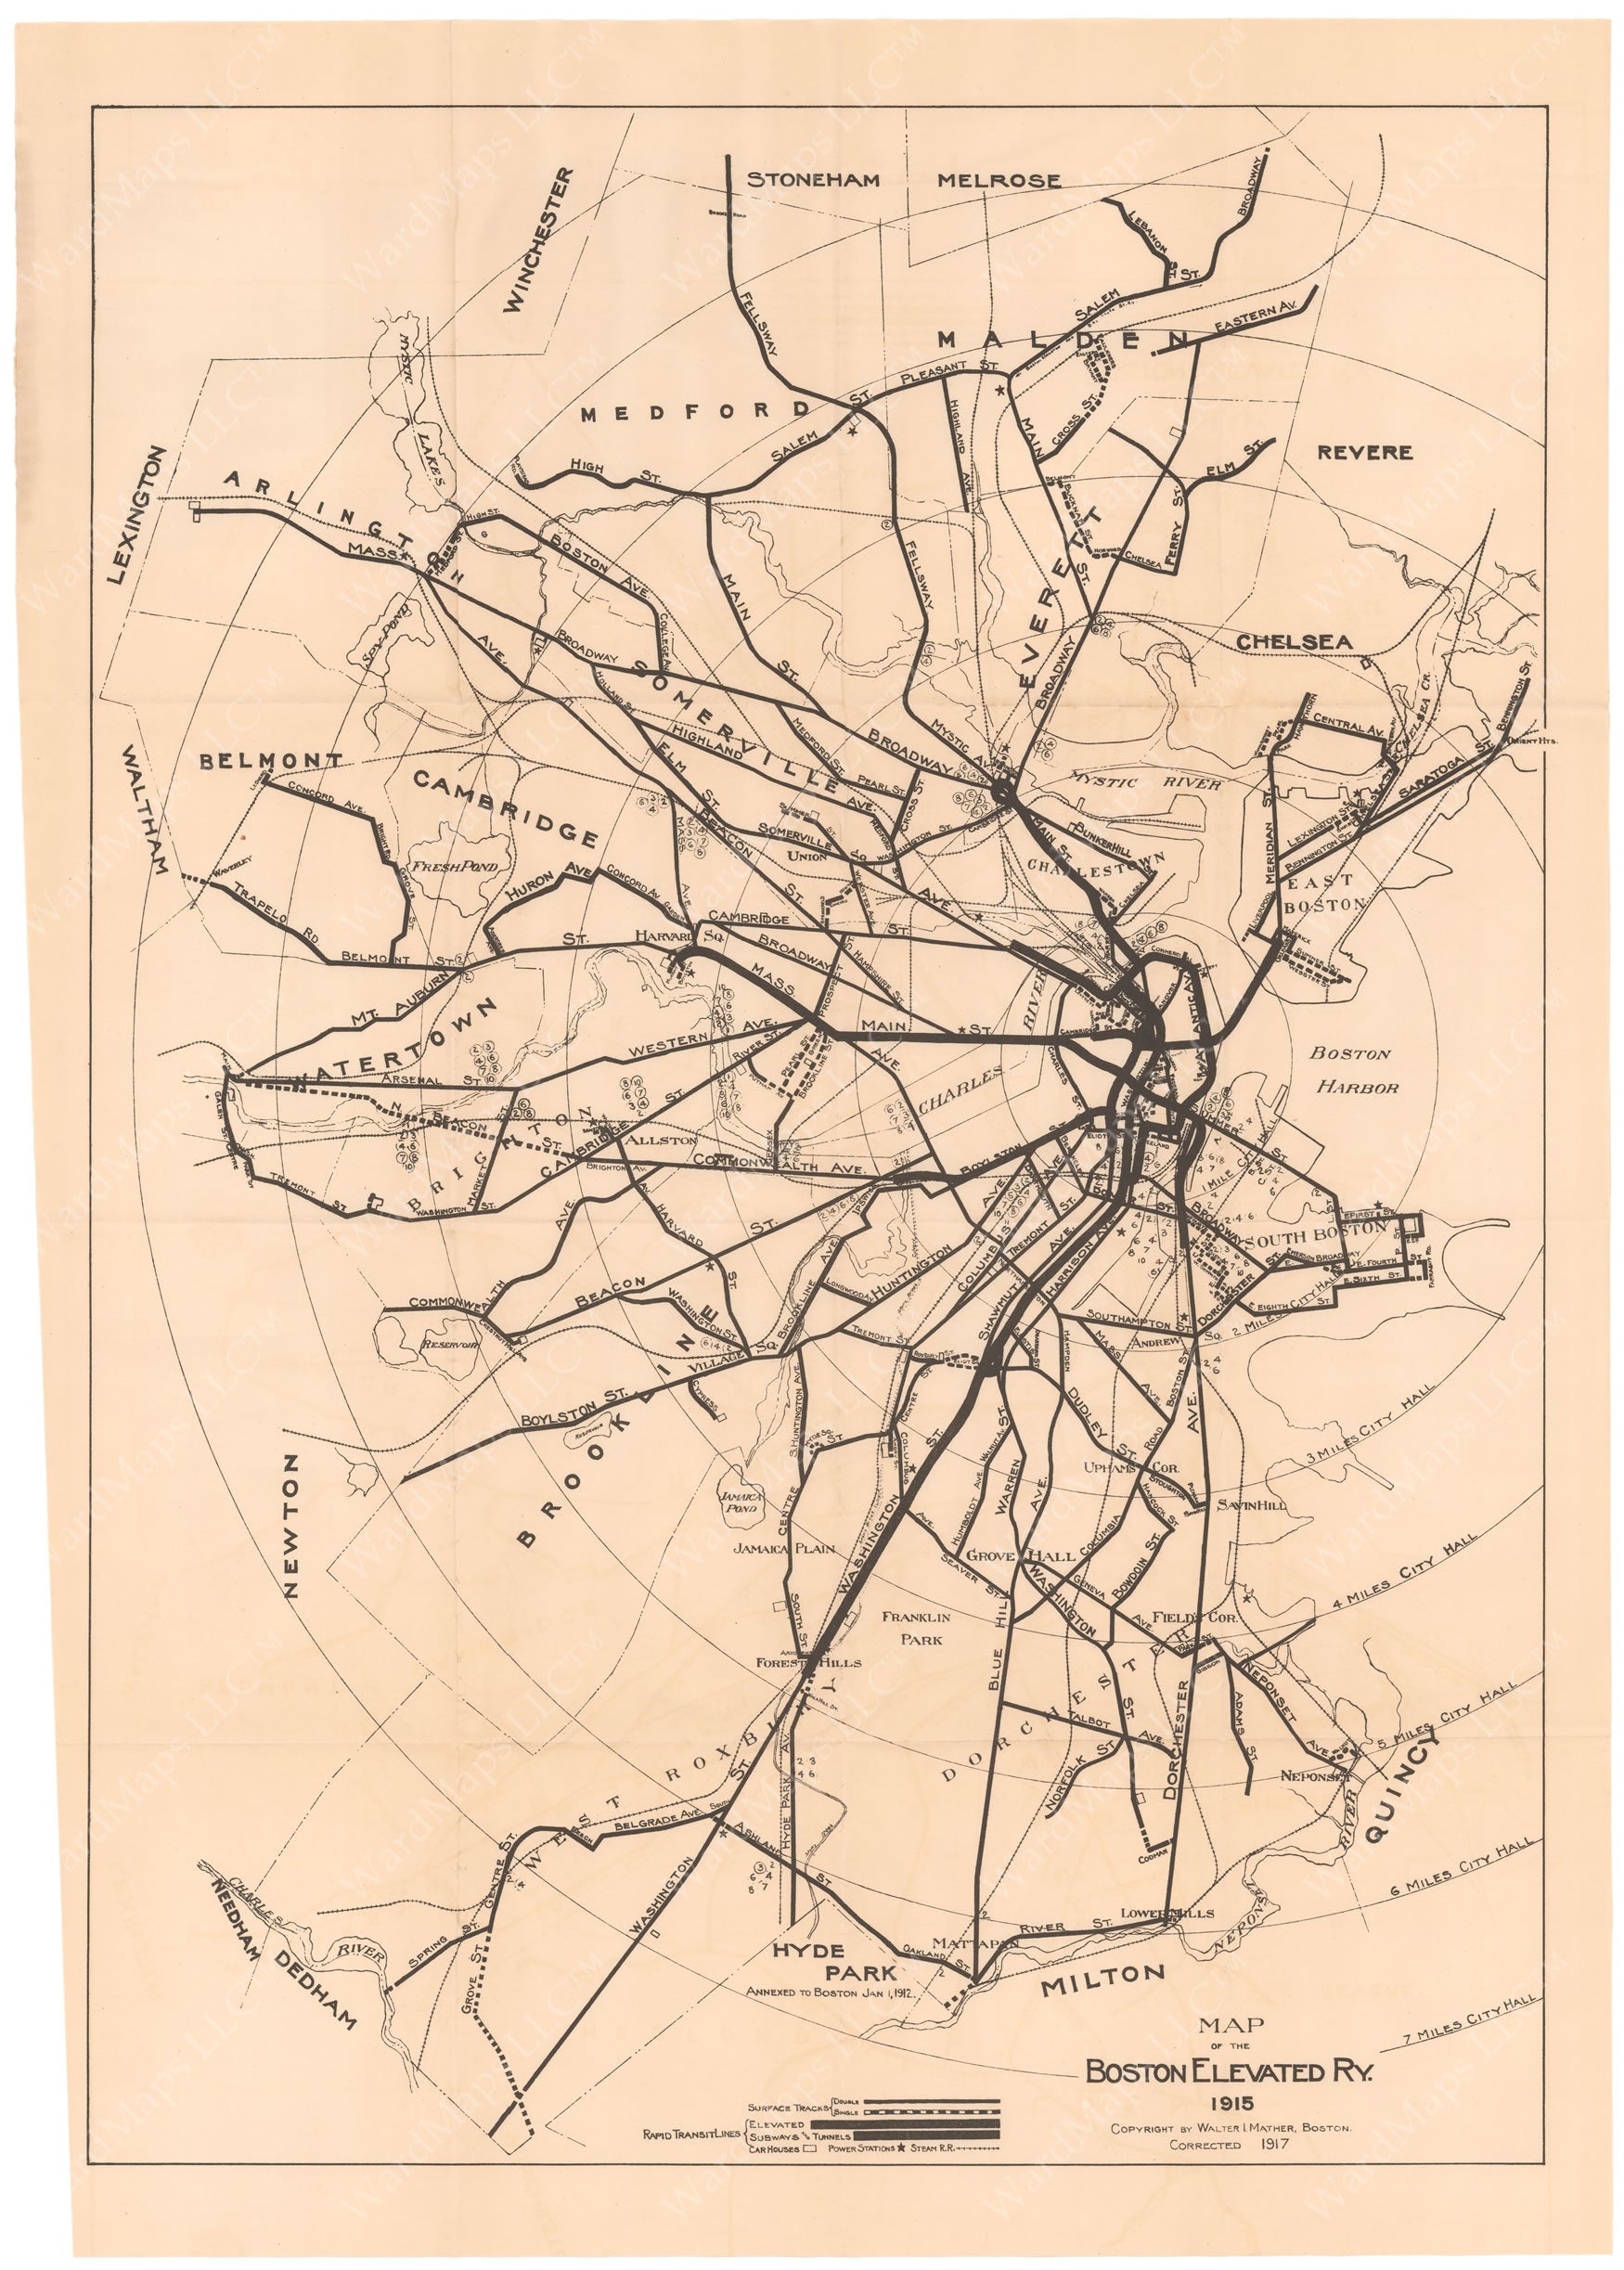 1917 Boston Elevated Railway Co. System Map